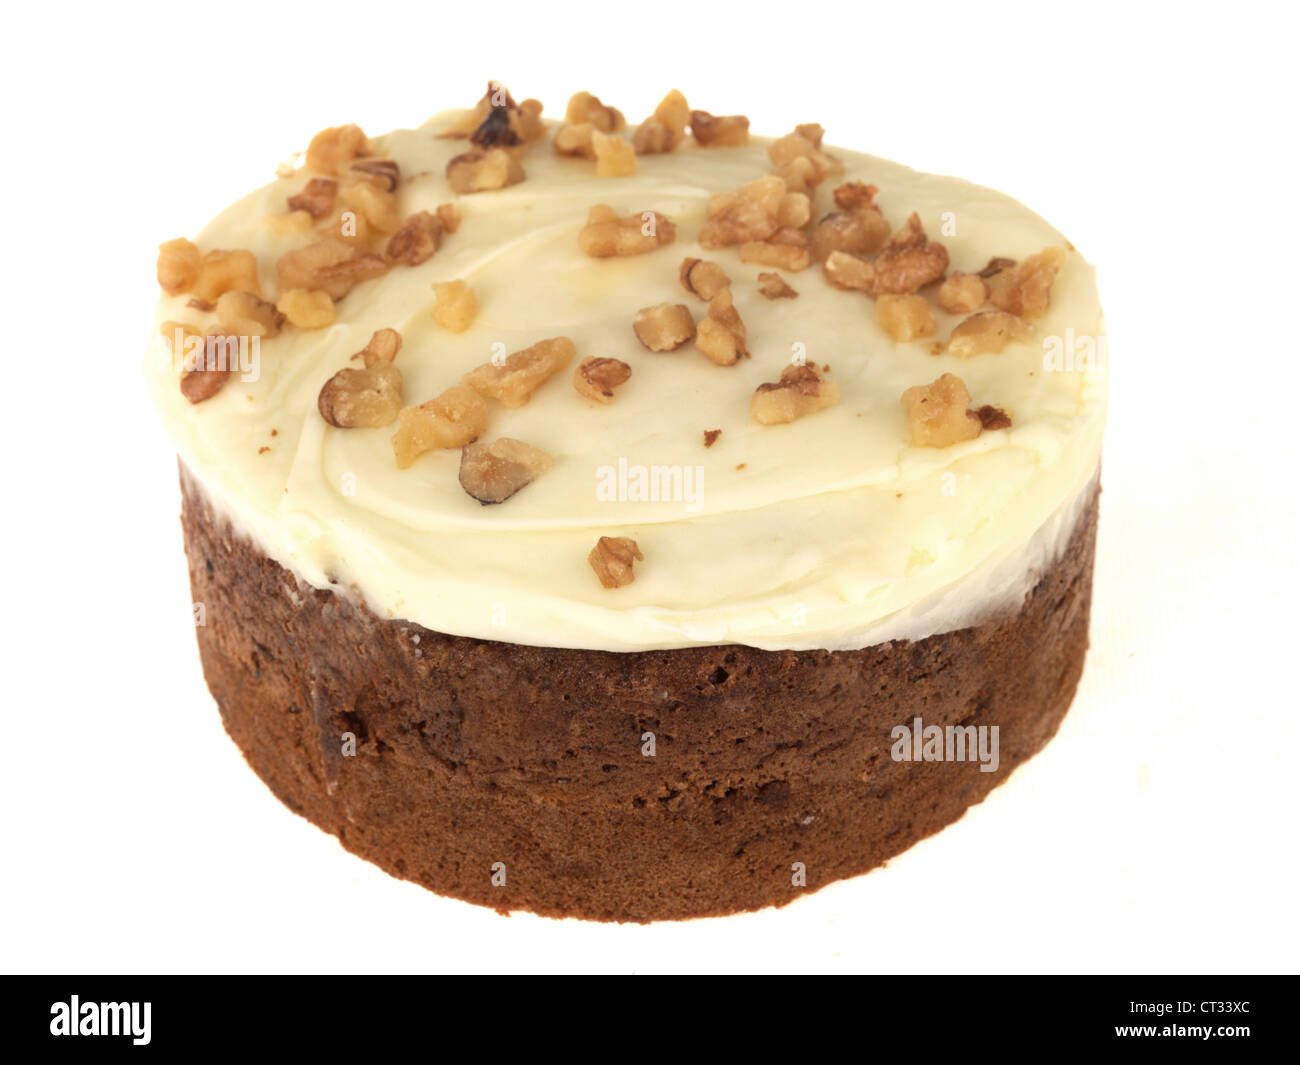 Freshly Baked And Decorated With Nuts And Icing Carrot and Walnut Cake Isolated Against A White Background With No People Stock Photo